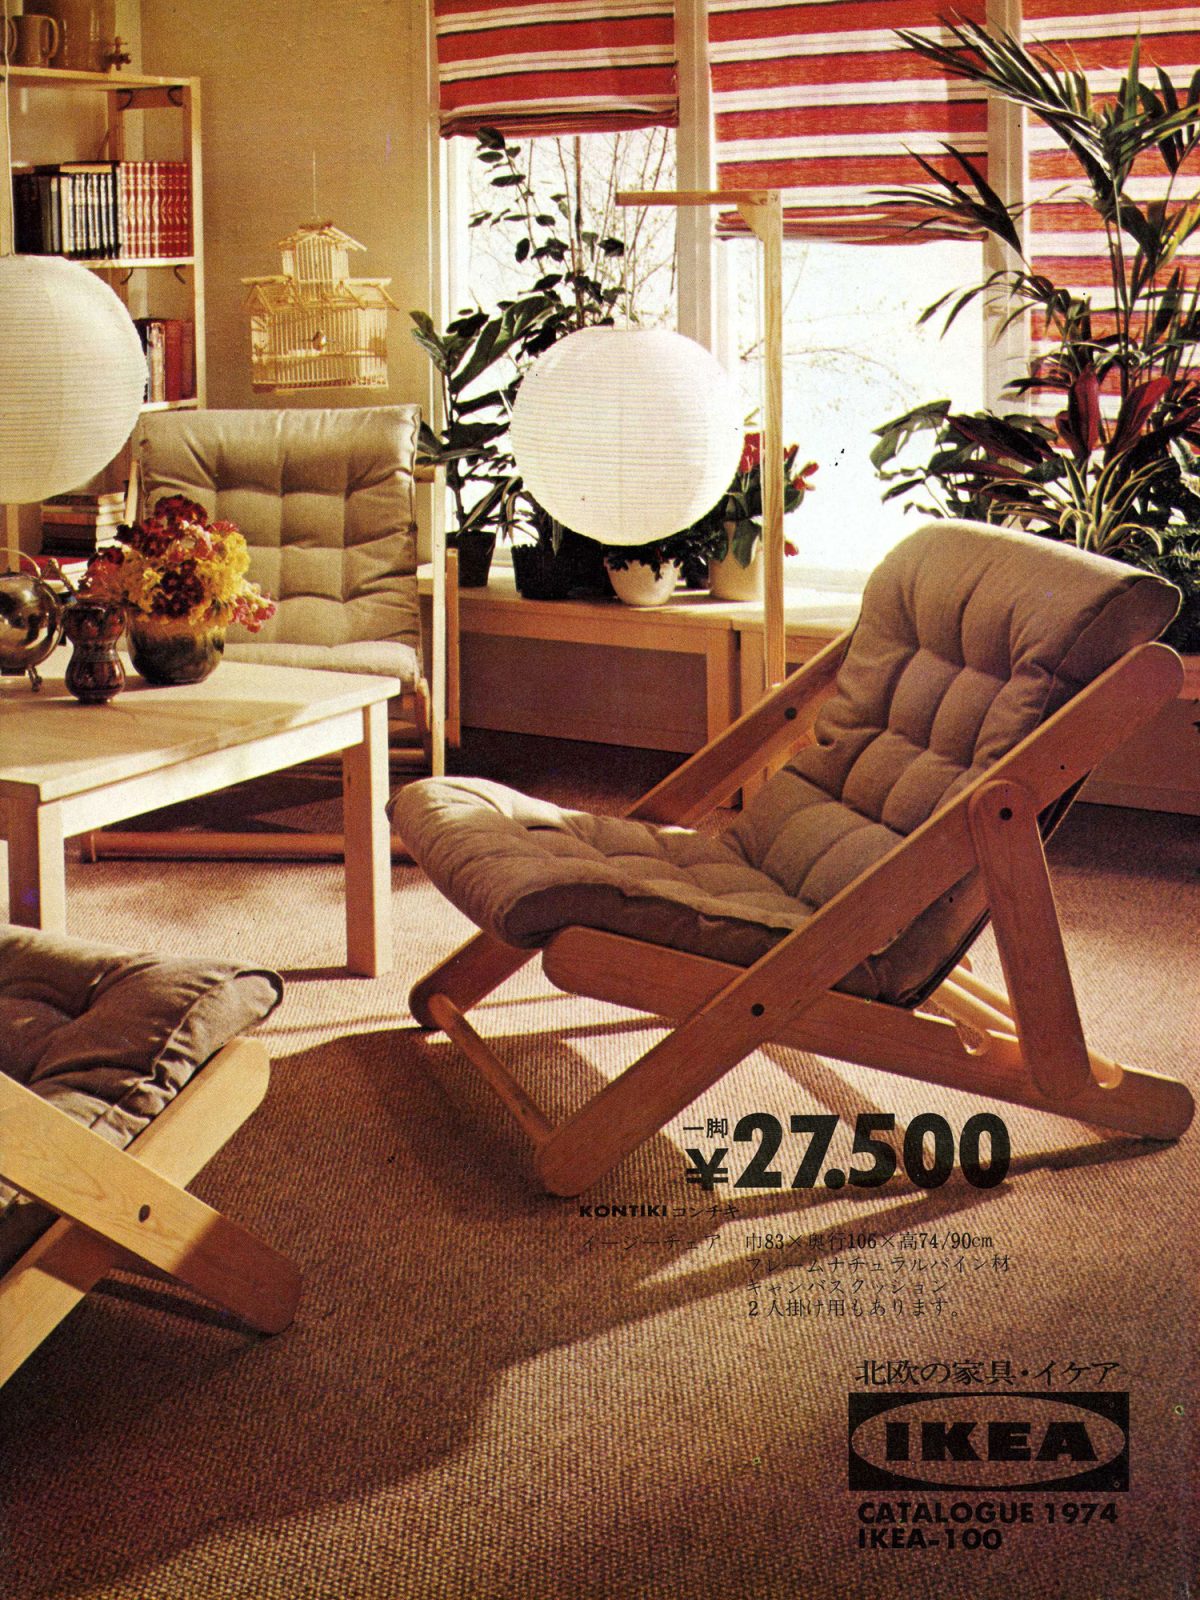 A page from a Japanese 1980s IKEA catalogue with an image of a living room dominated by two KON-TIKI chairs.